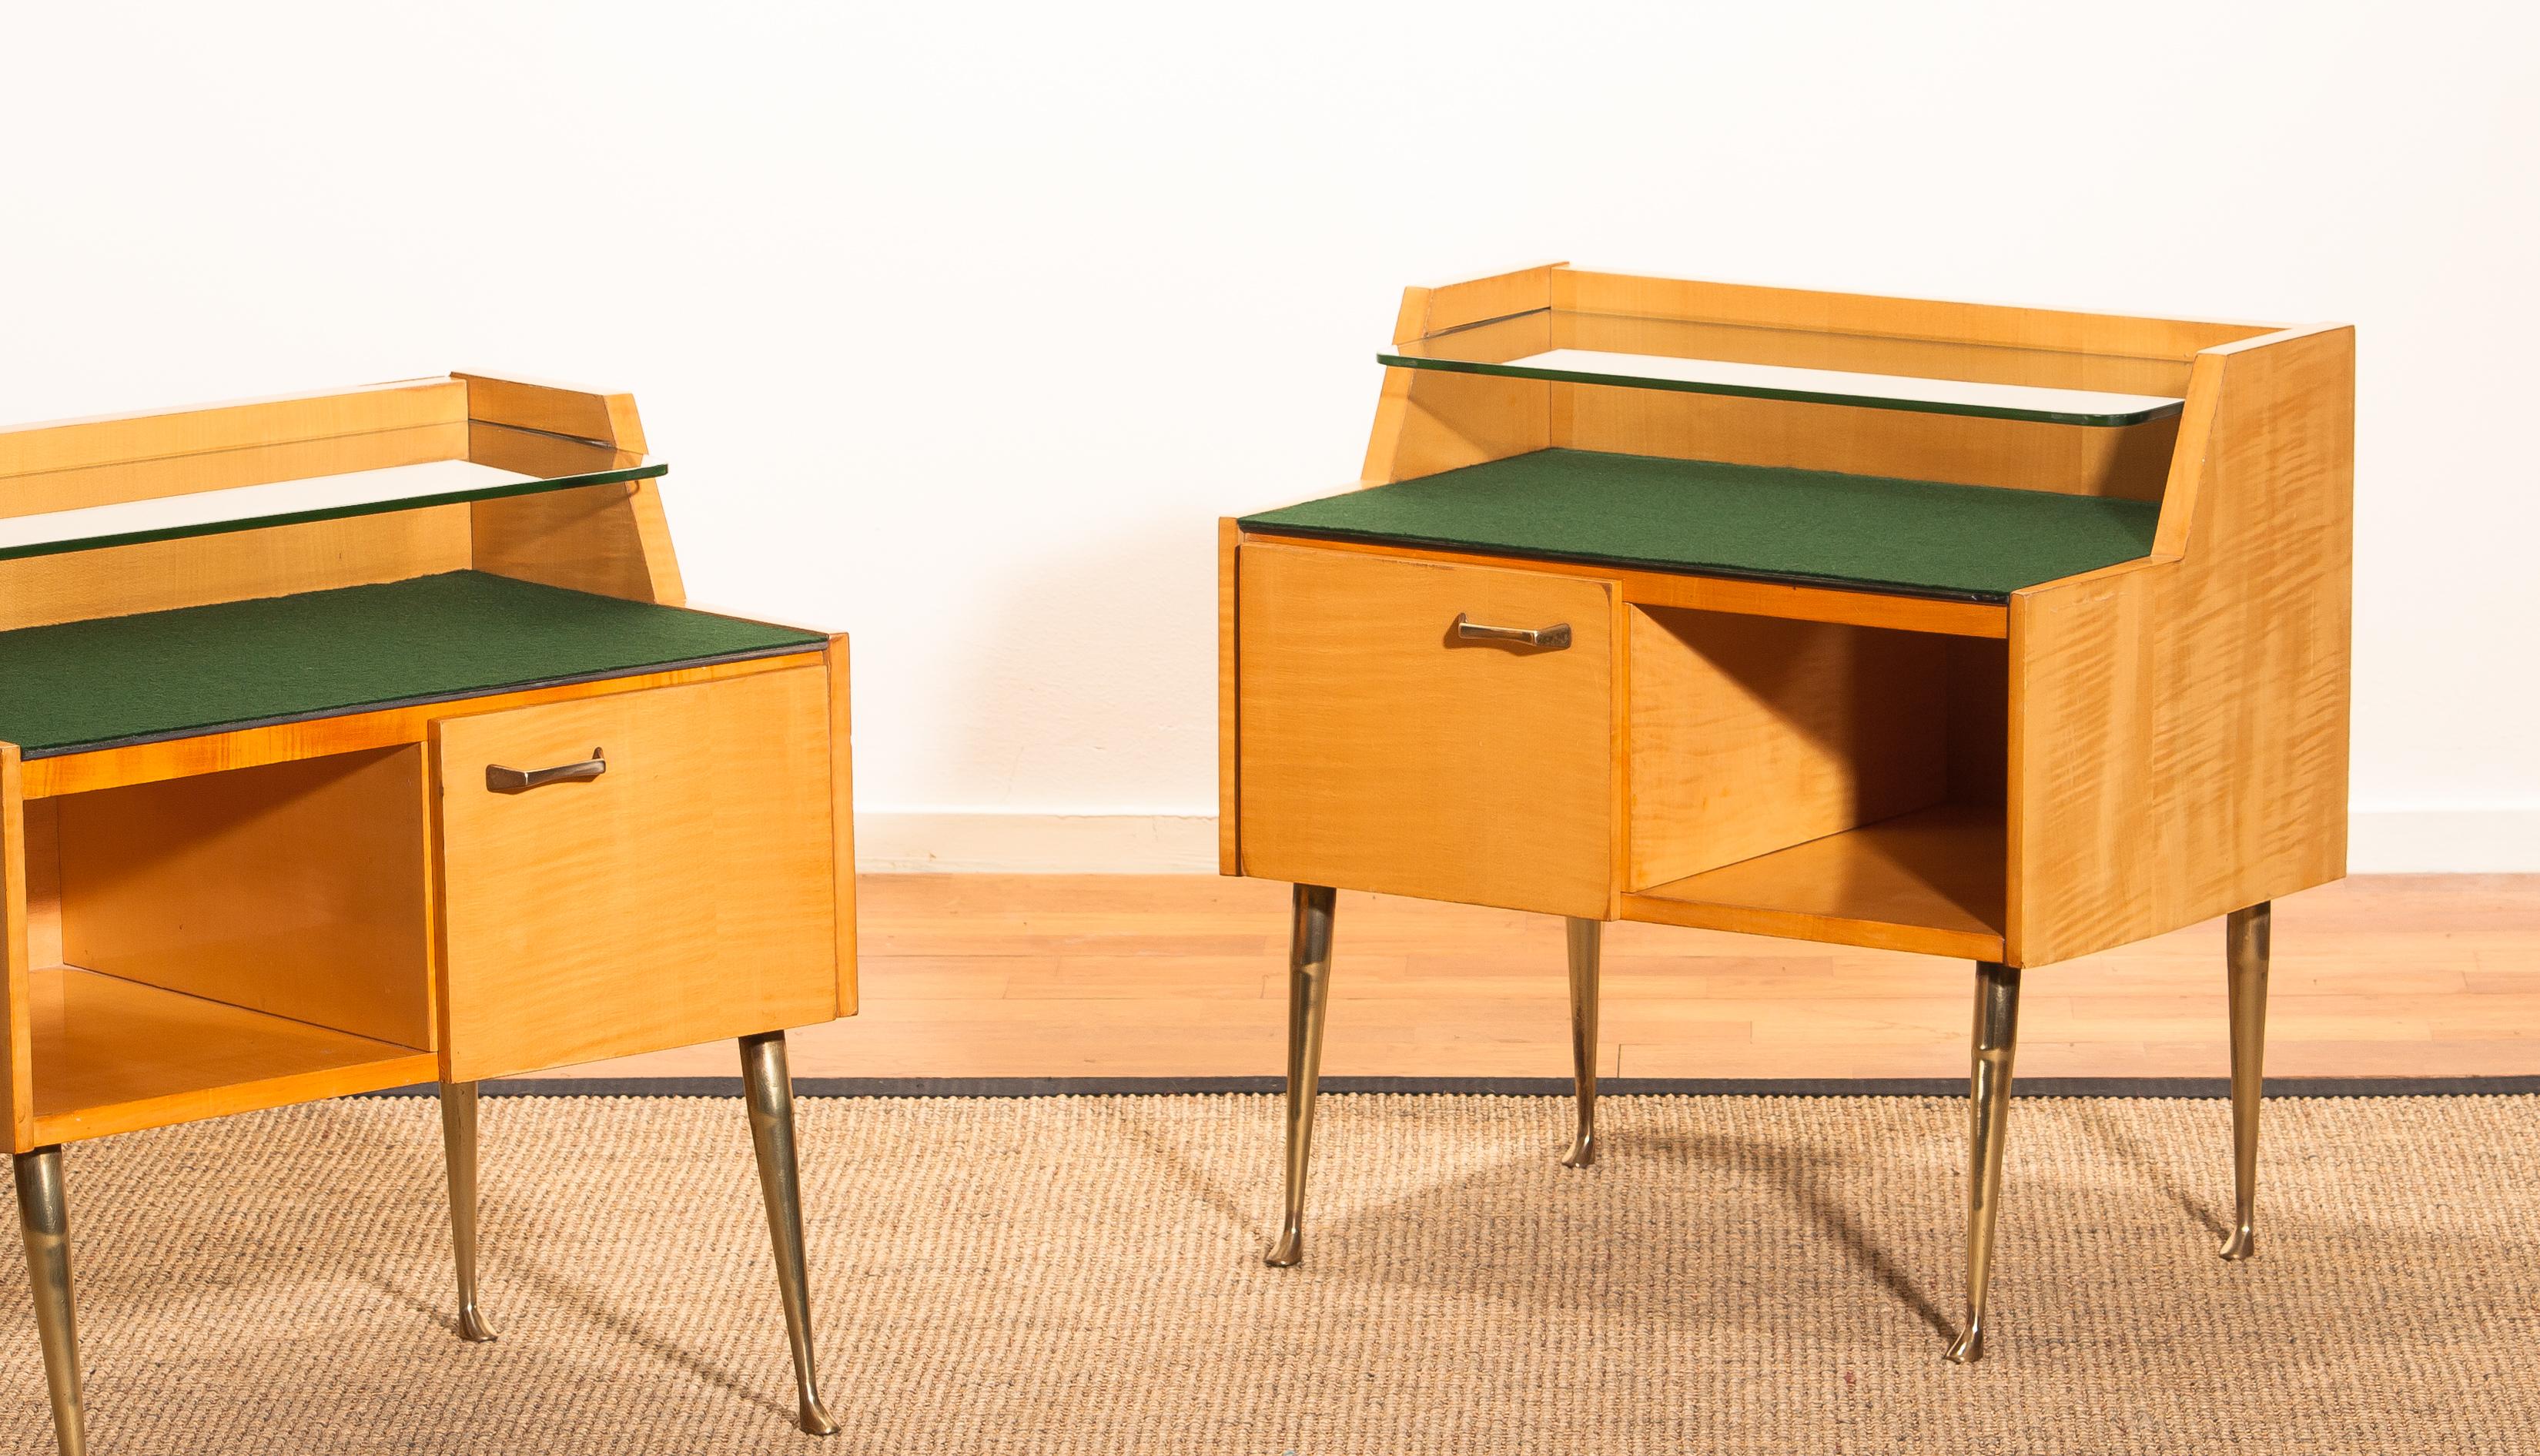 1950s, Pair of Italian Nightstands in Maple with Brass Legs by Paolo Buffa 3